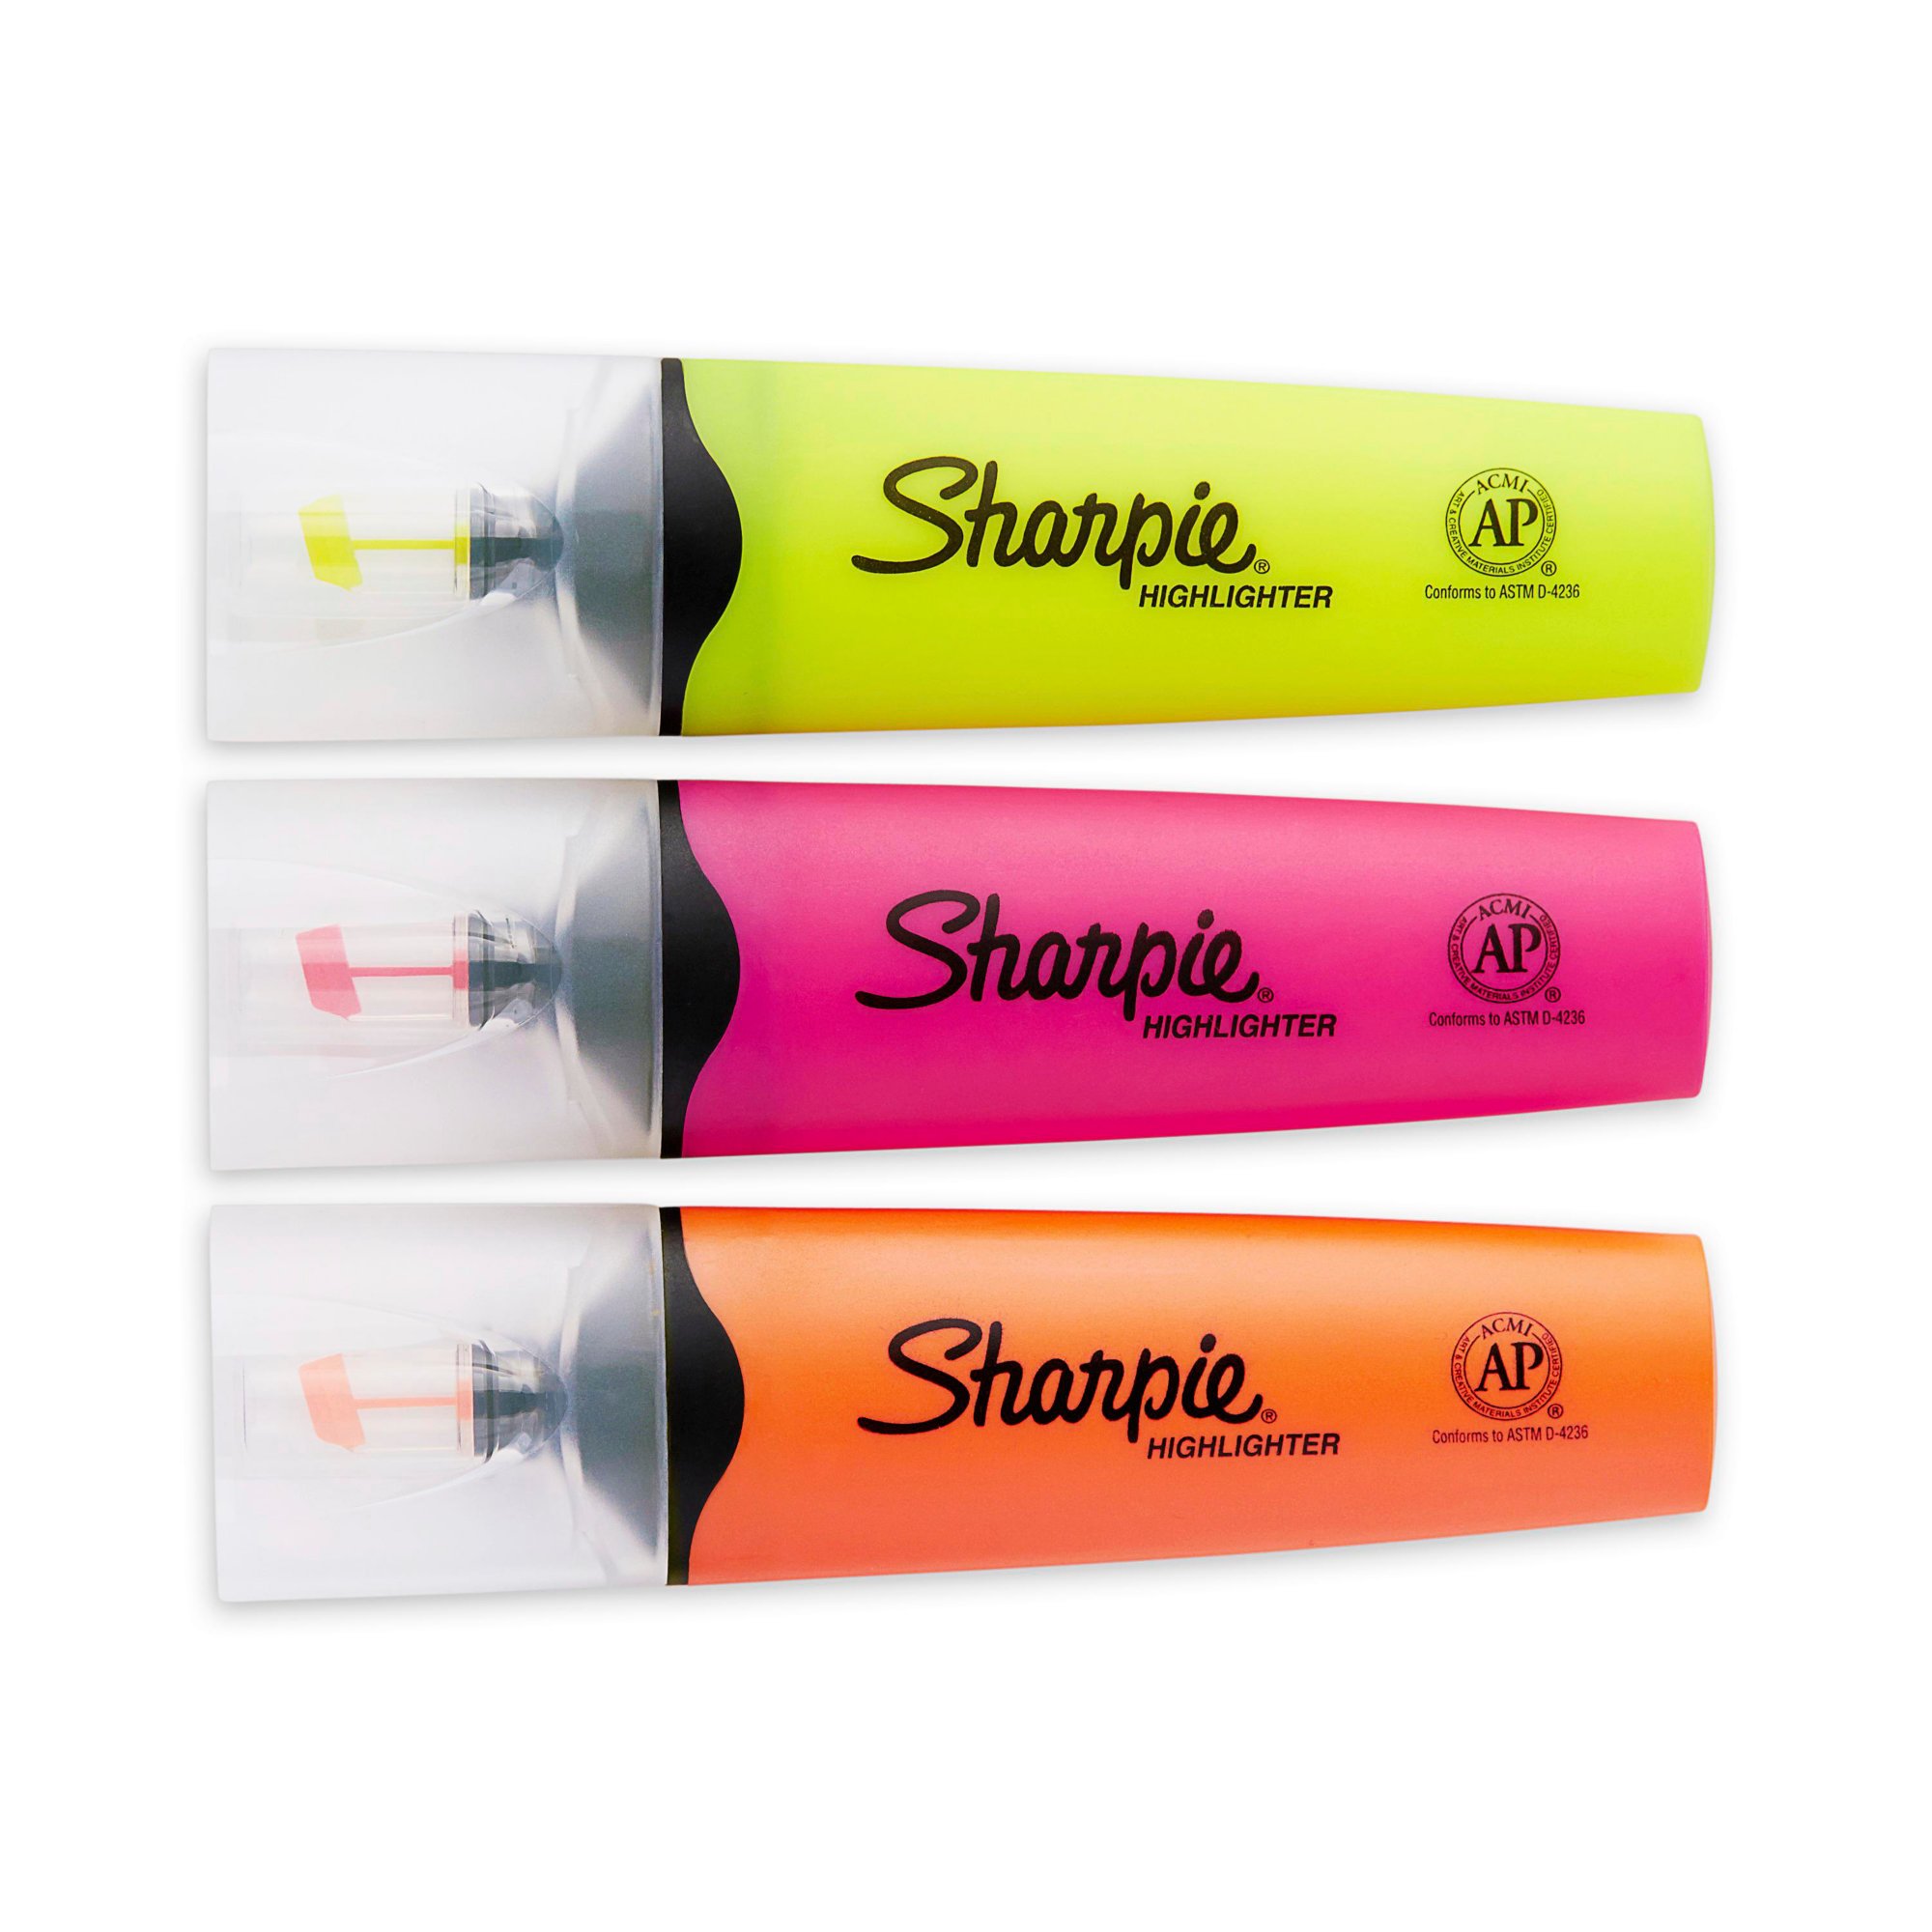 Sharpie Clearview Highlighters - Get Great Value, Give to a Cause! –  www.